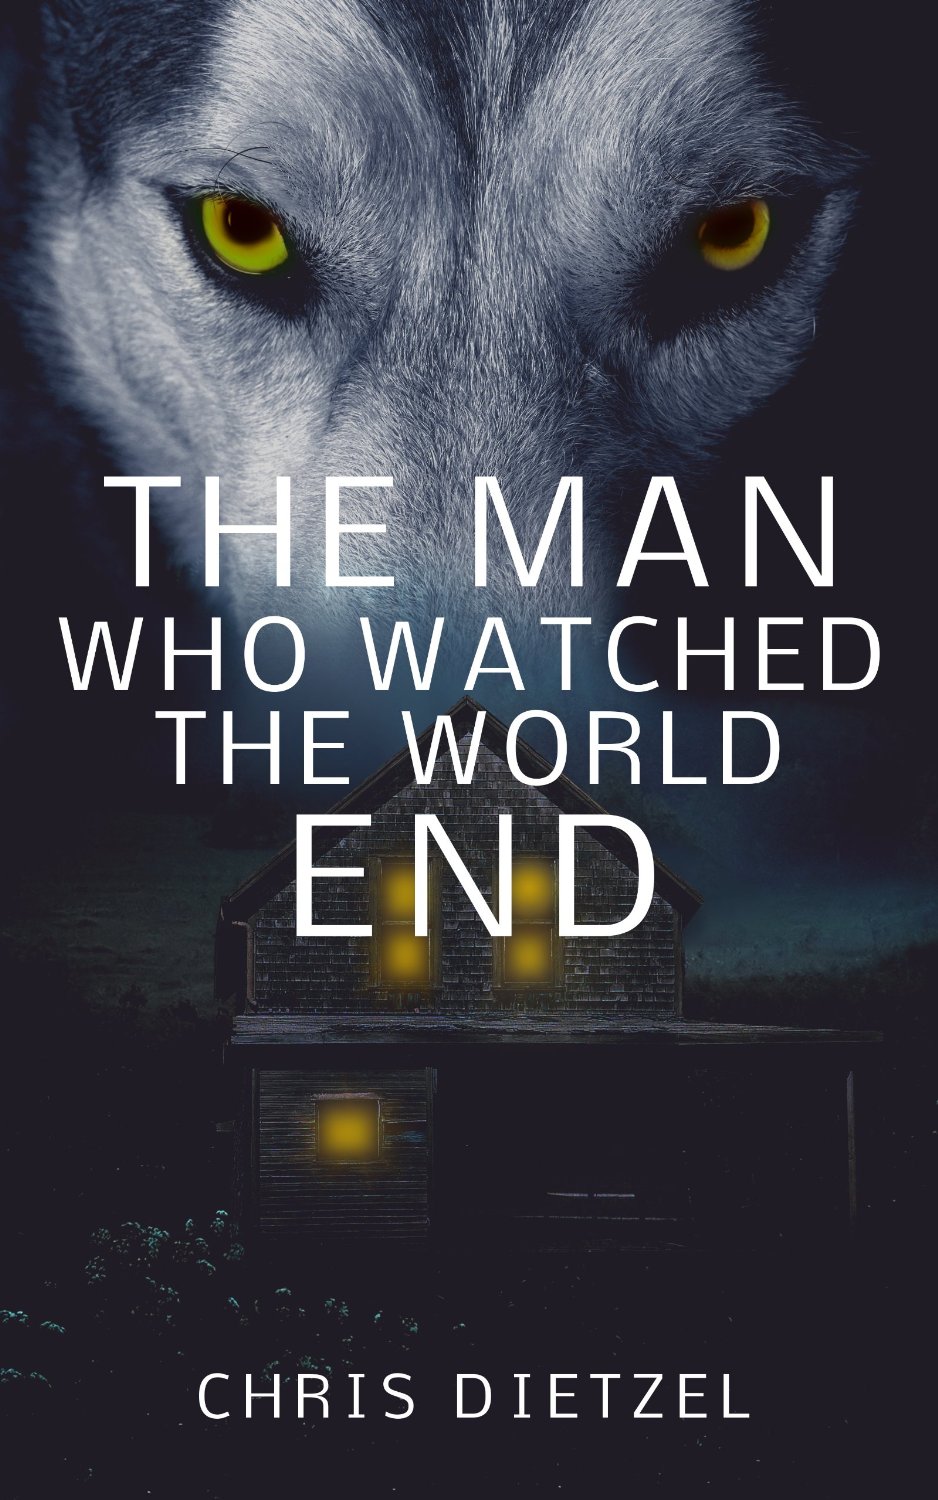 The Man Who Watched The World End (The Great De-evolution) by Chris Dietzel